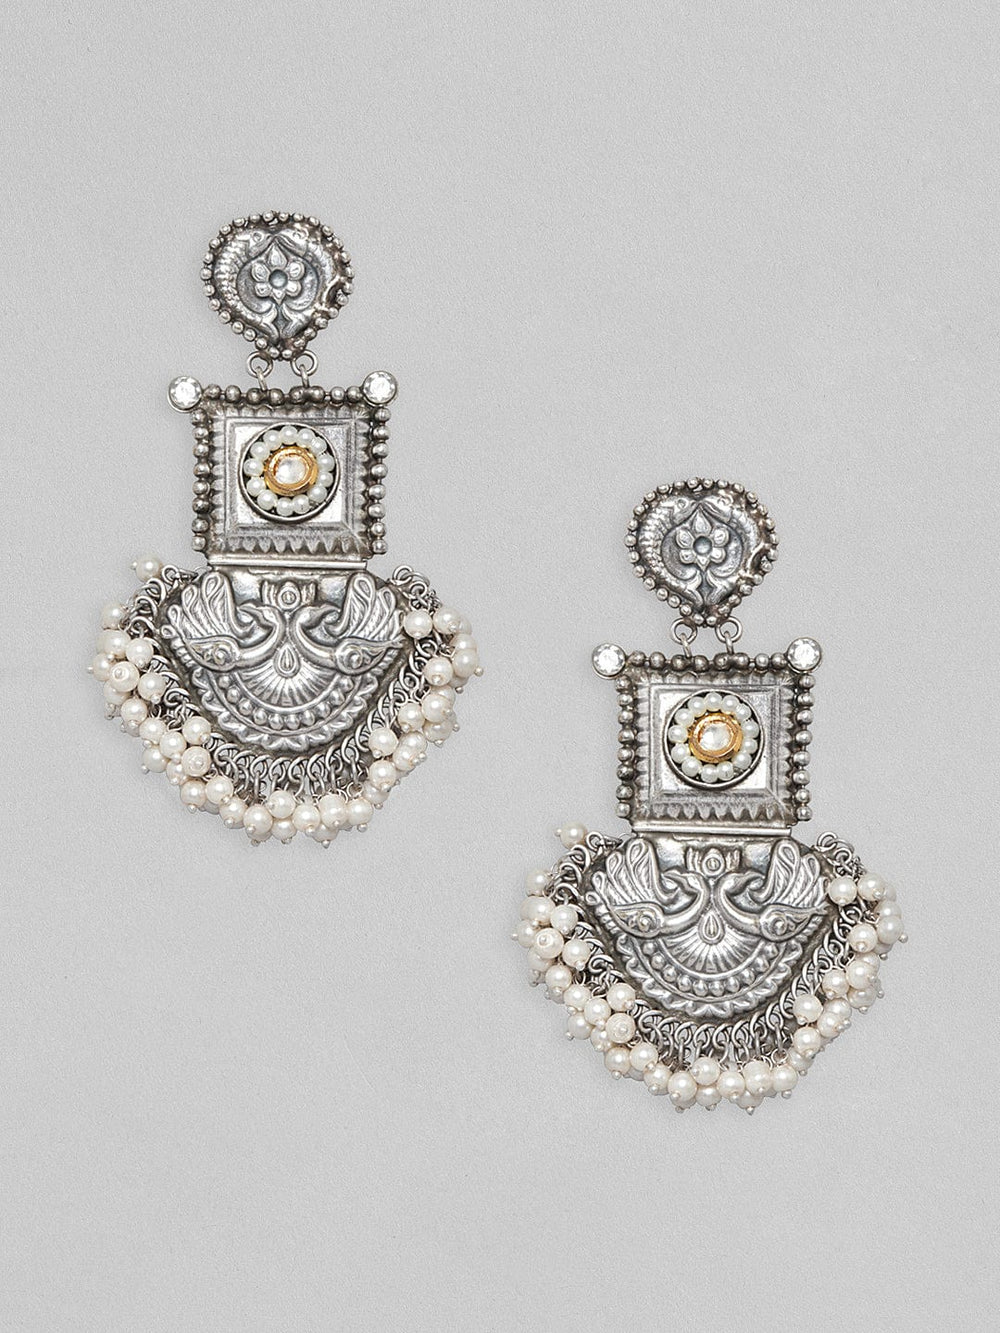 Rubans Silver Oxidised Earrings With Peacock Design And White Beads Earrings